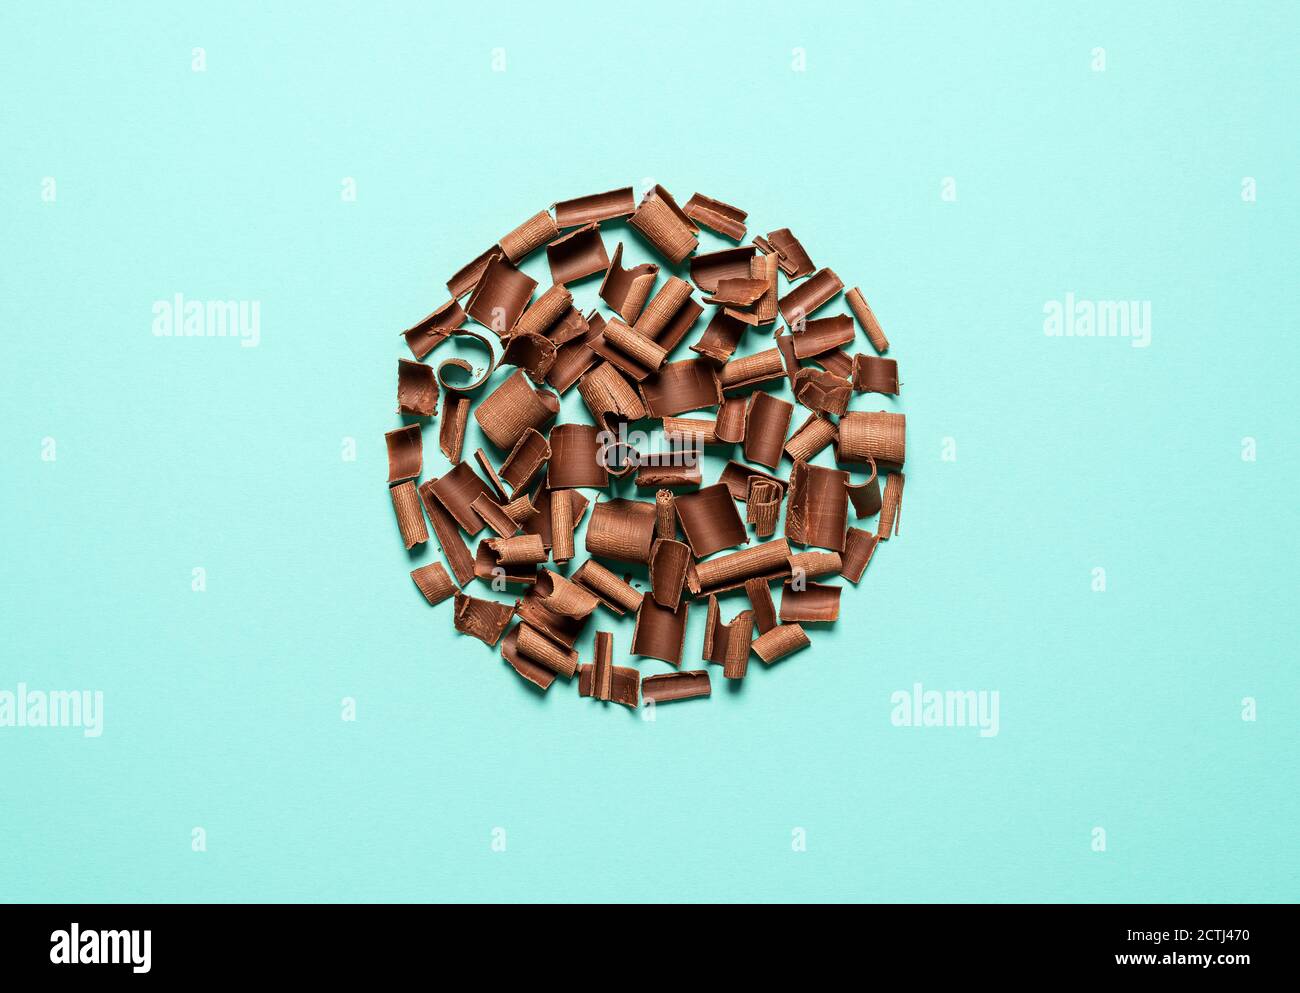 Chocolate shavings, circle shaped layout, isolated on a blue background. Top view of milk chocolate pieces. Decorative ingredients for desserts. Stock Photo